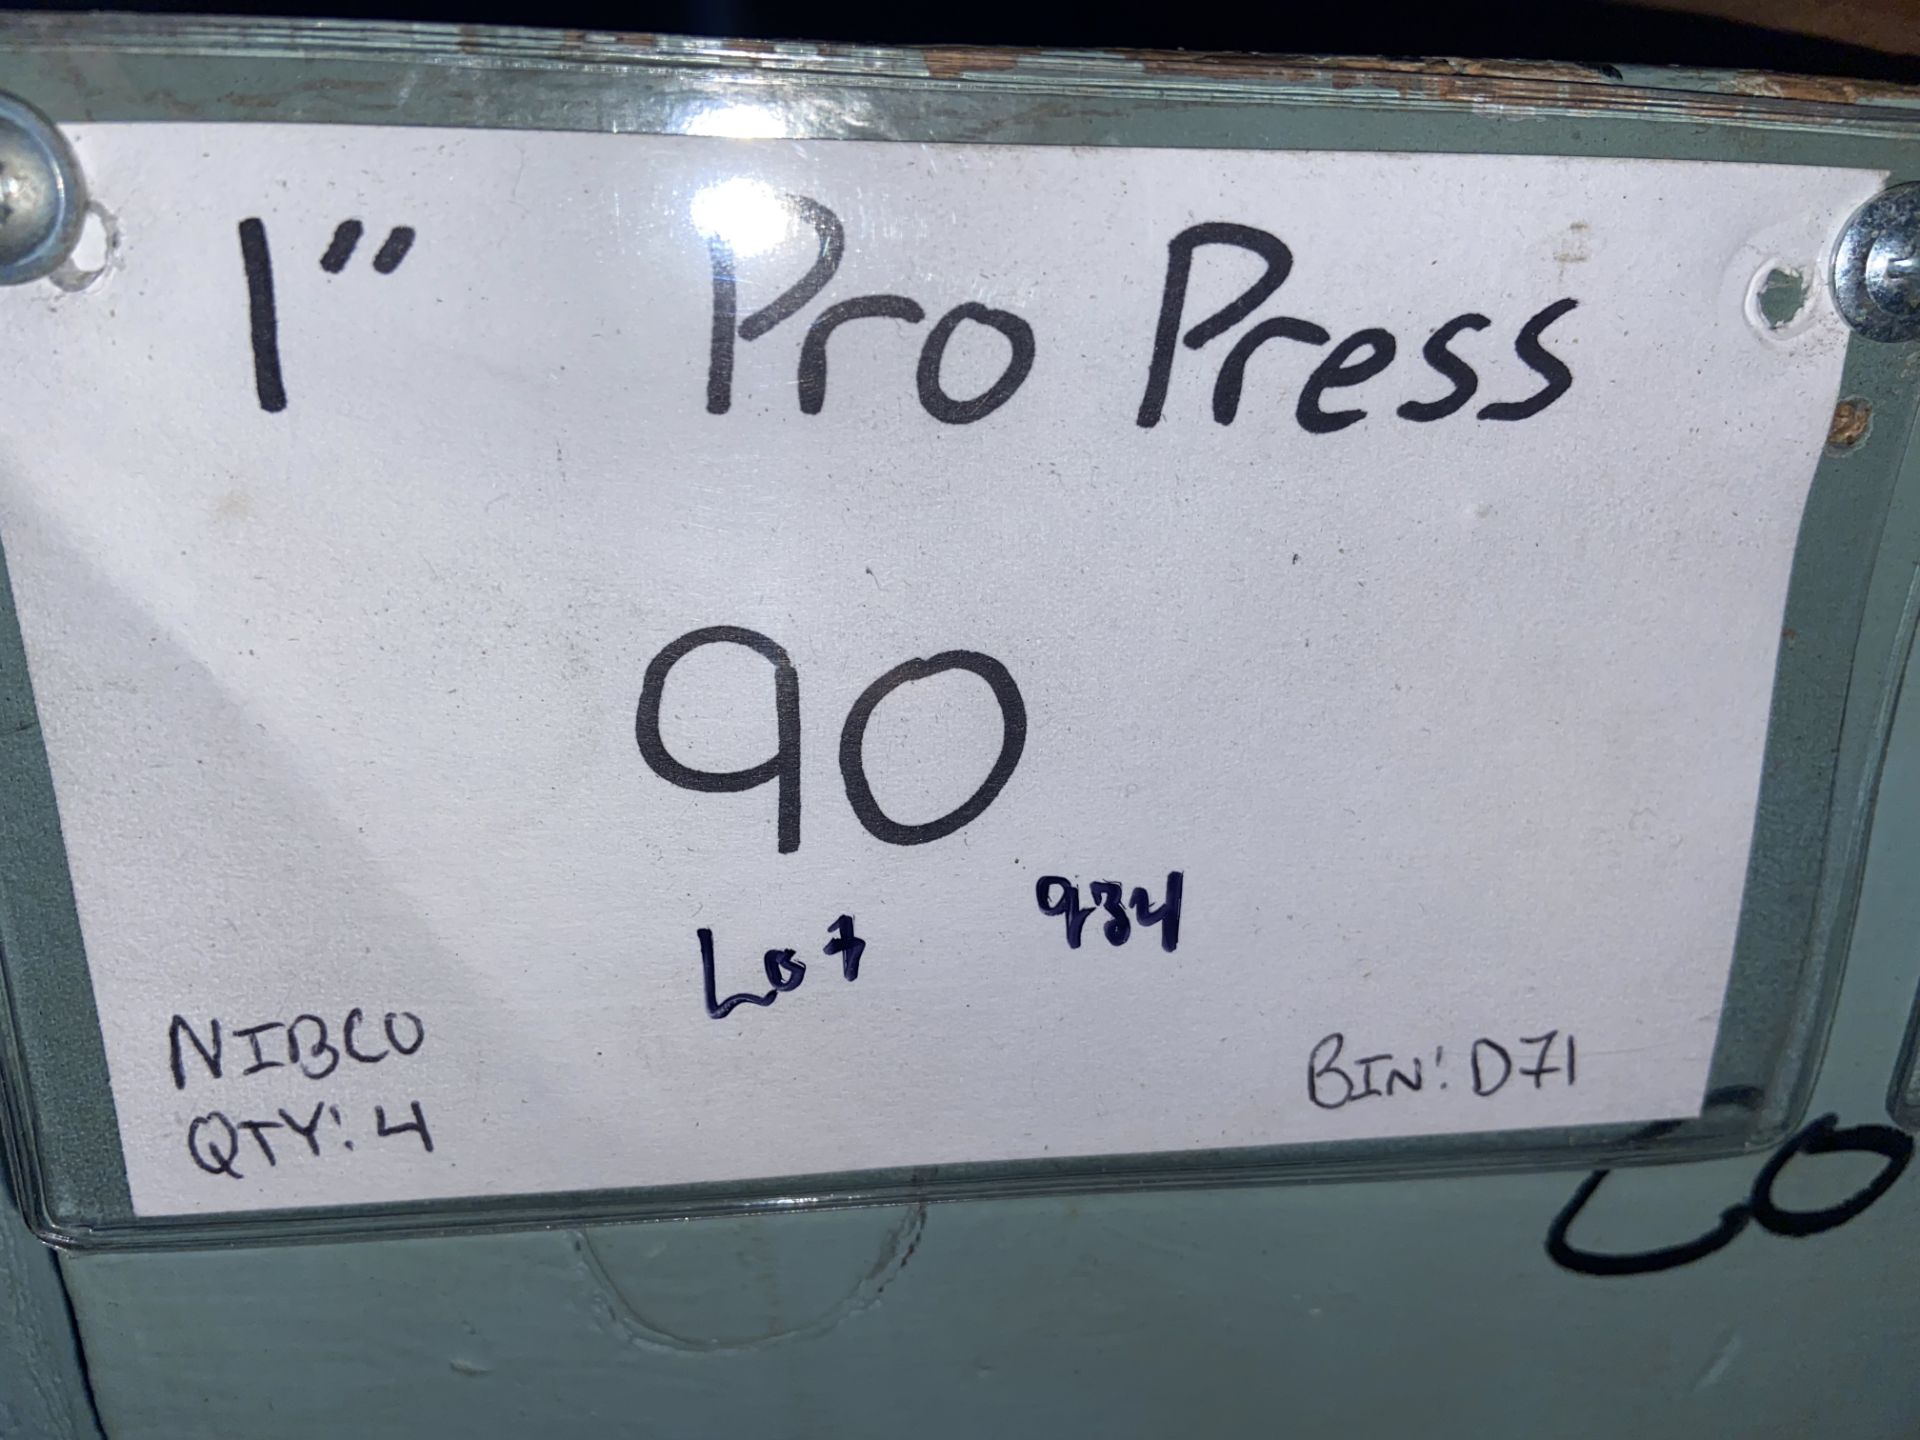 (4) 1” Pro Press (Bin:D71)(LOCATED IN MONROEVILLE, PA) - Image 2 of 2